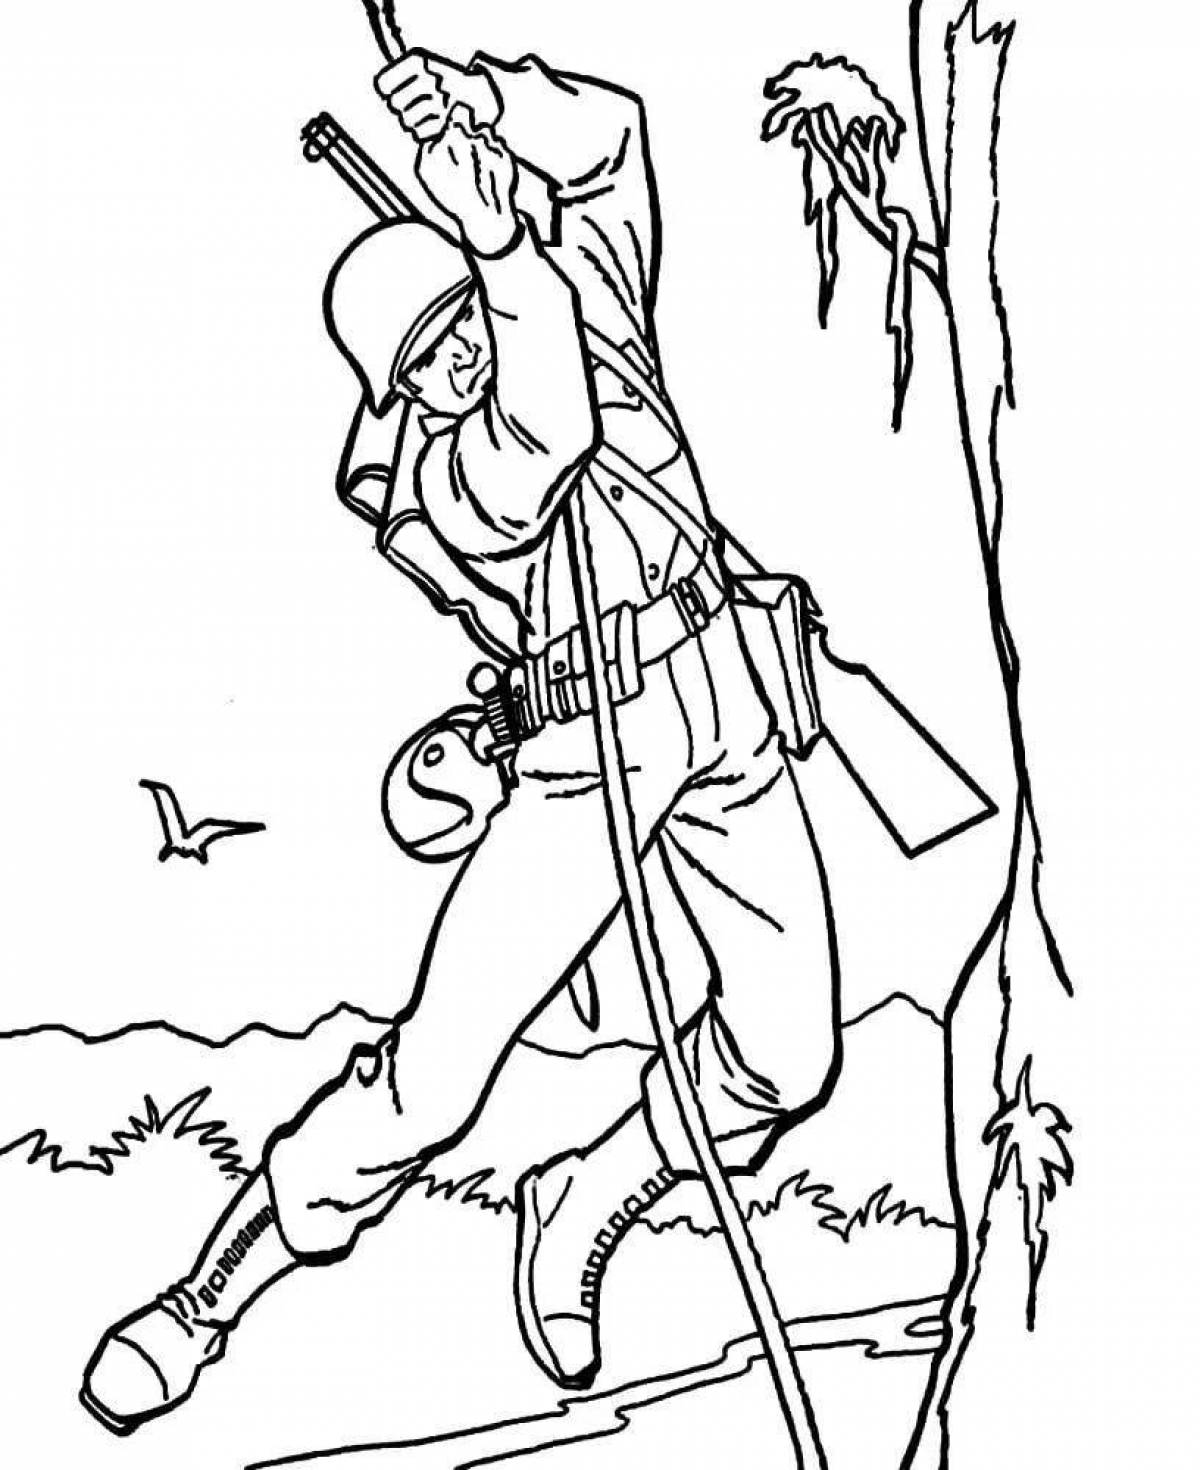 Coloring page majestic heroes of the second world war